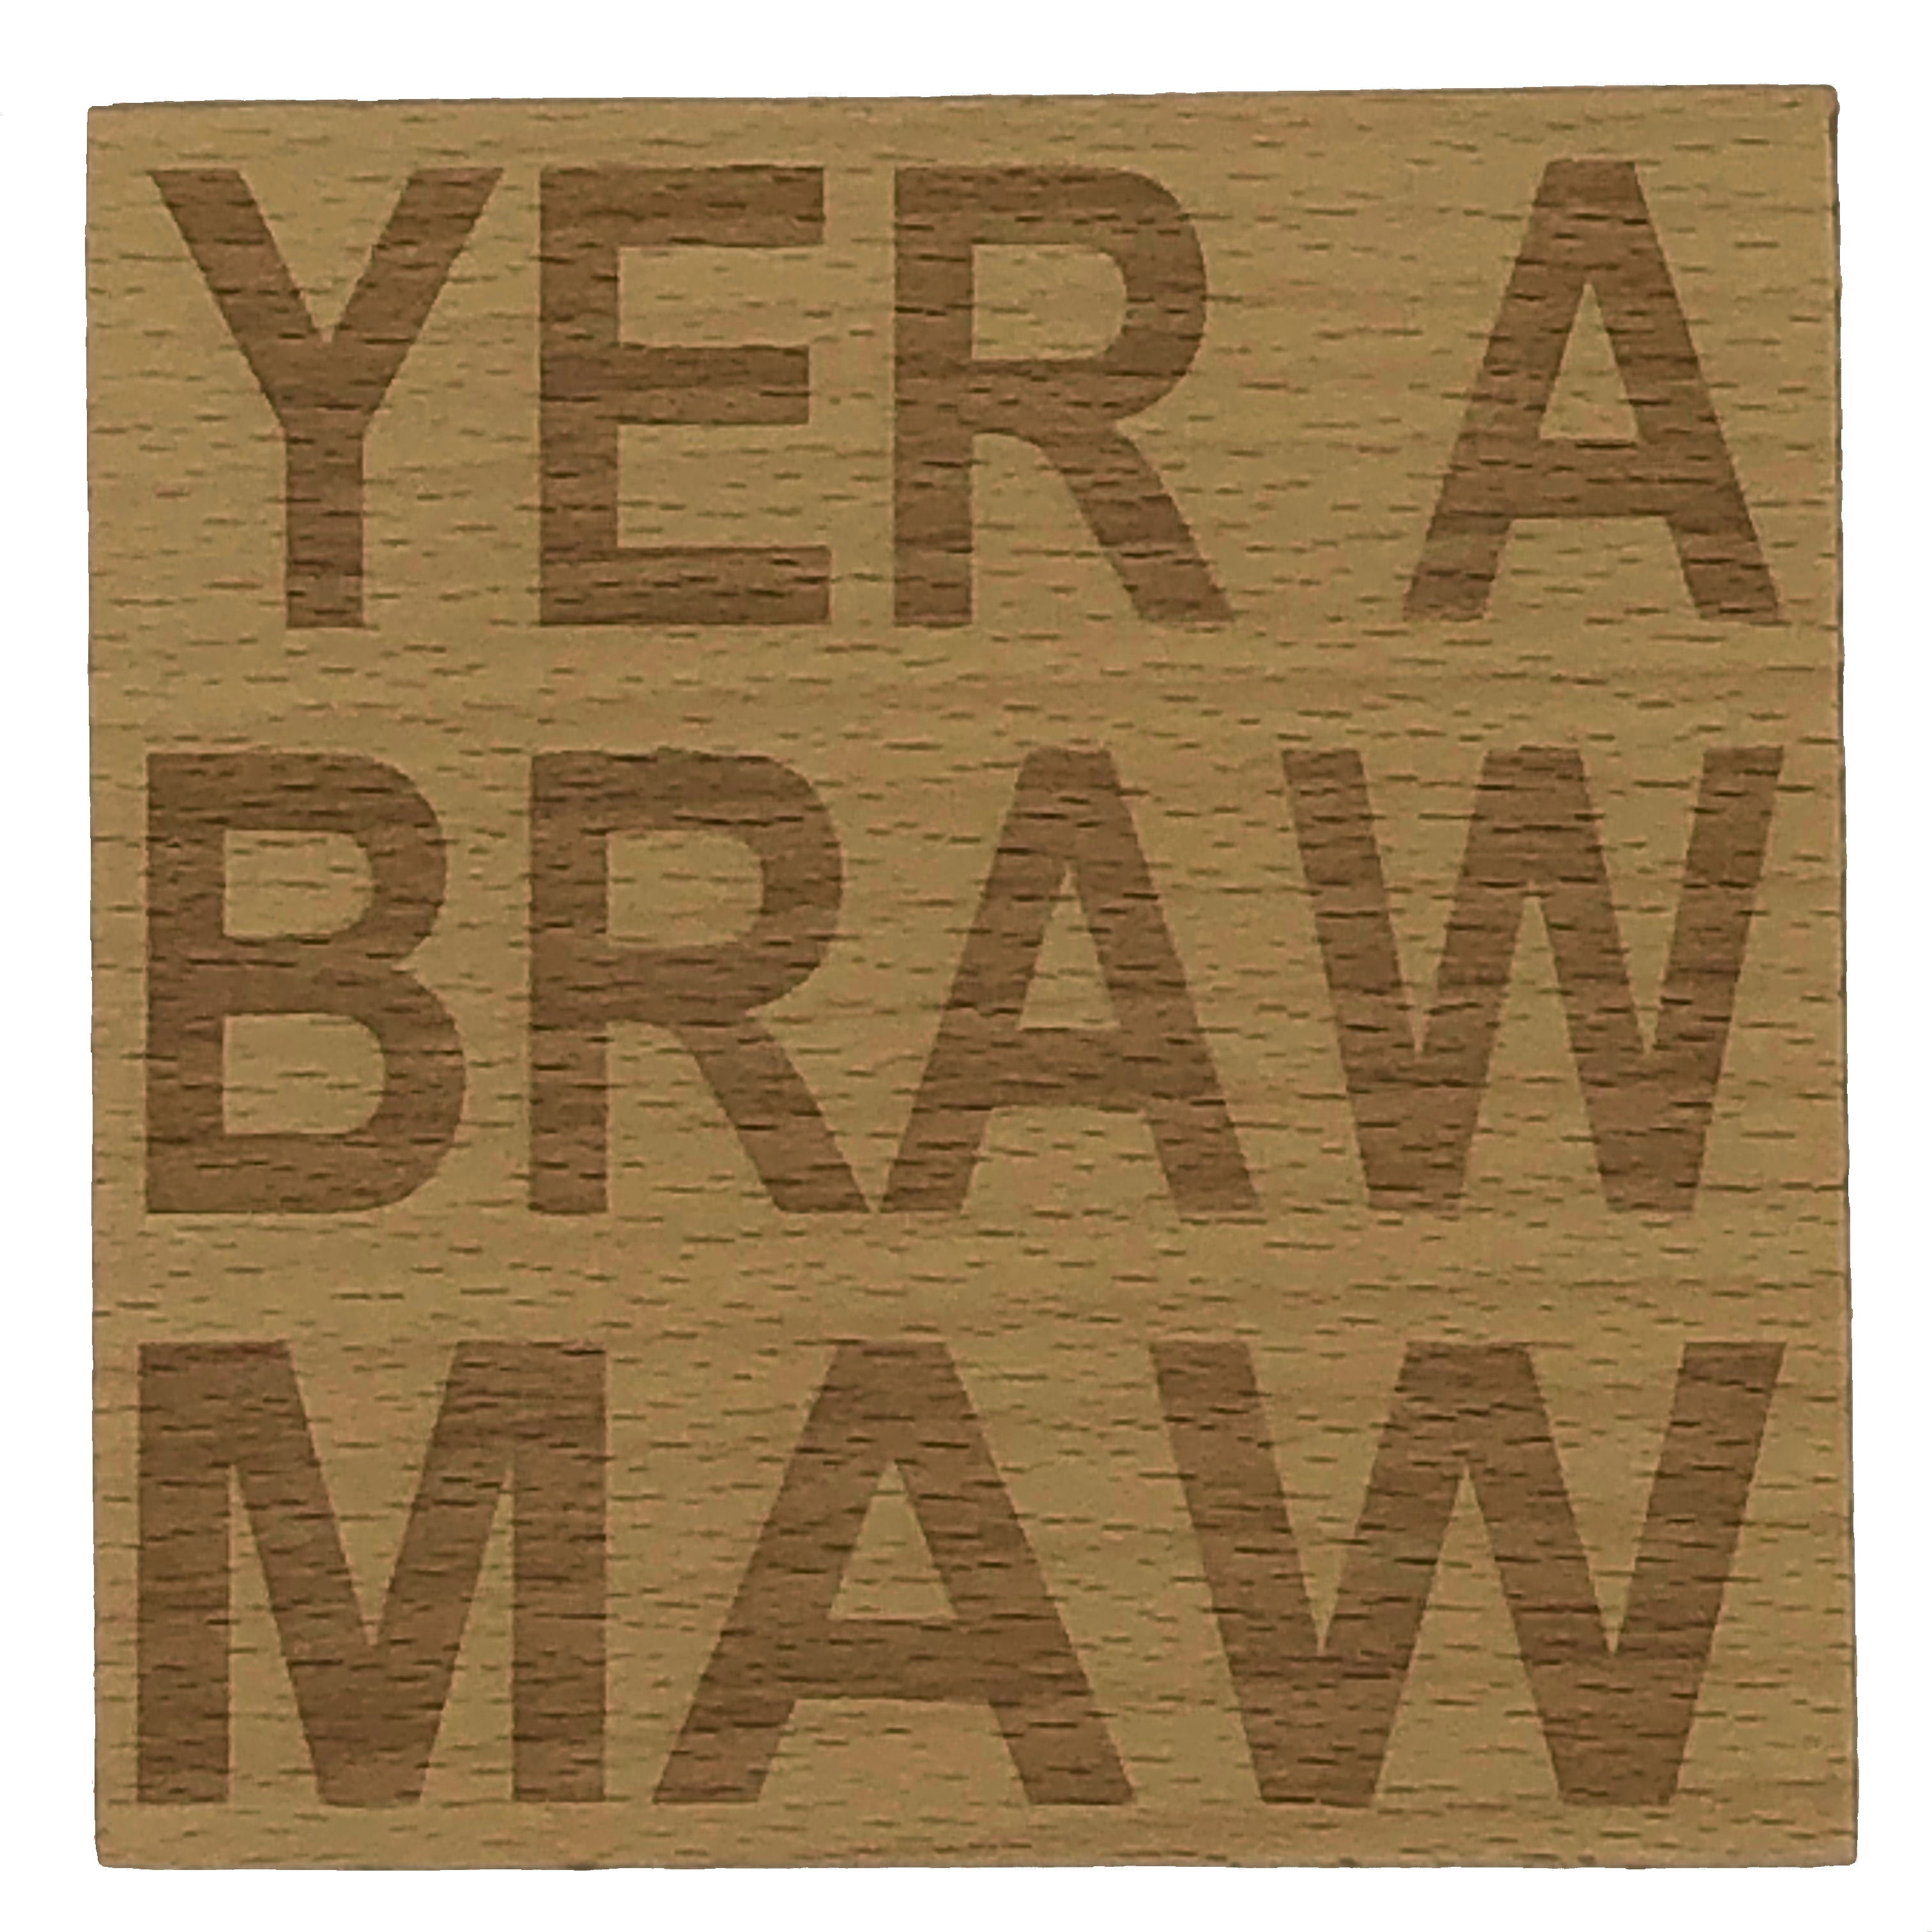 Wooden coaster gift for mother - Scottish - yer a braw maw - varnished for protection